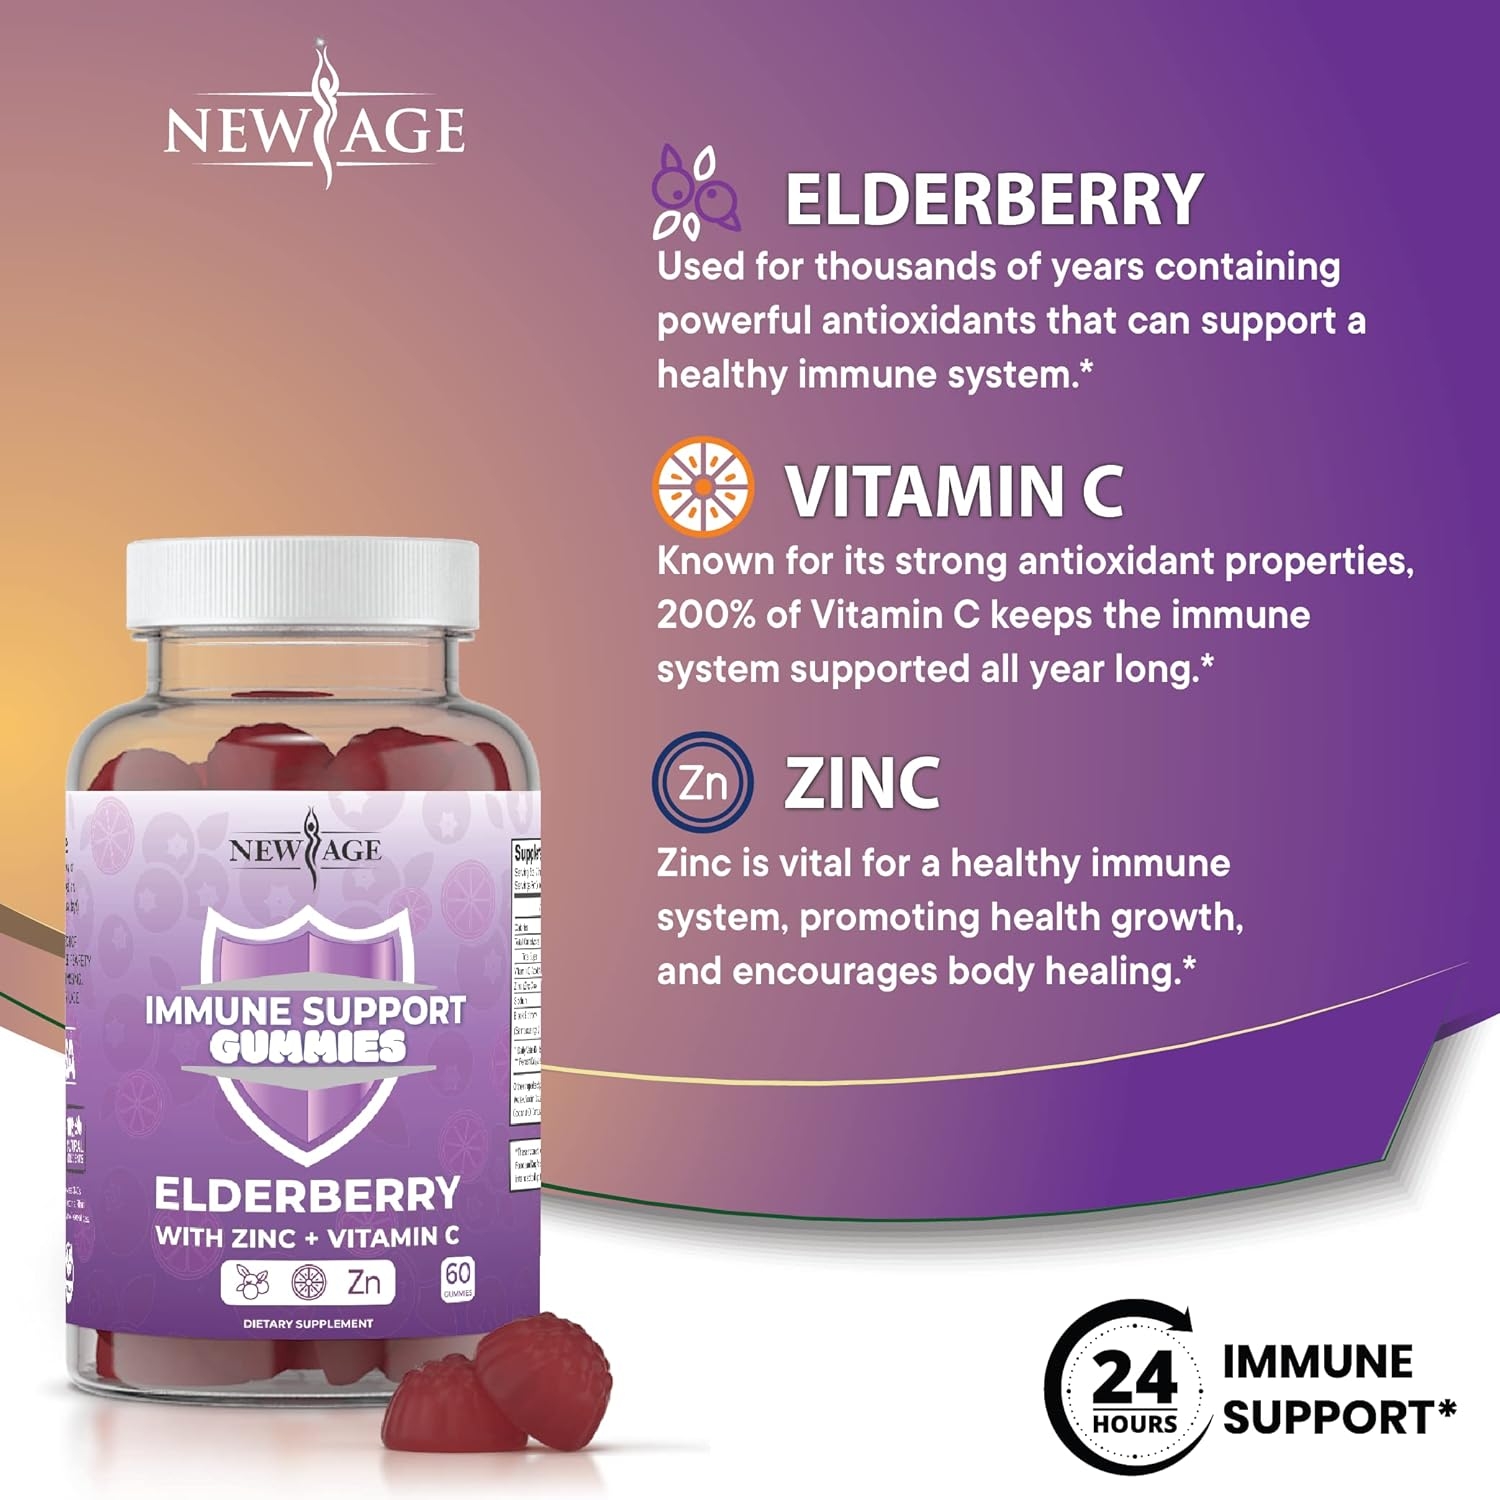 New Age Immune System Support Gummies - Sambucus Black Elderberry Gummies with Vitamin C and Zinc - All Natural Immunity Gummies - 60 Count (1 Pack 60 Count)